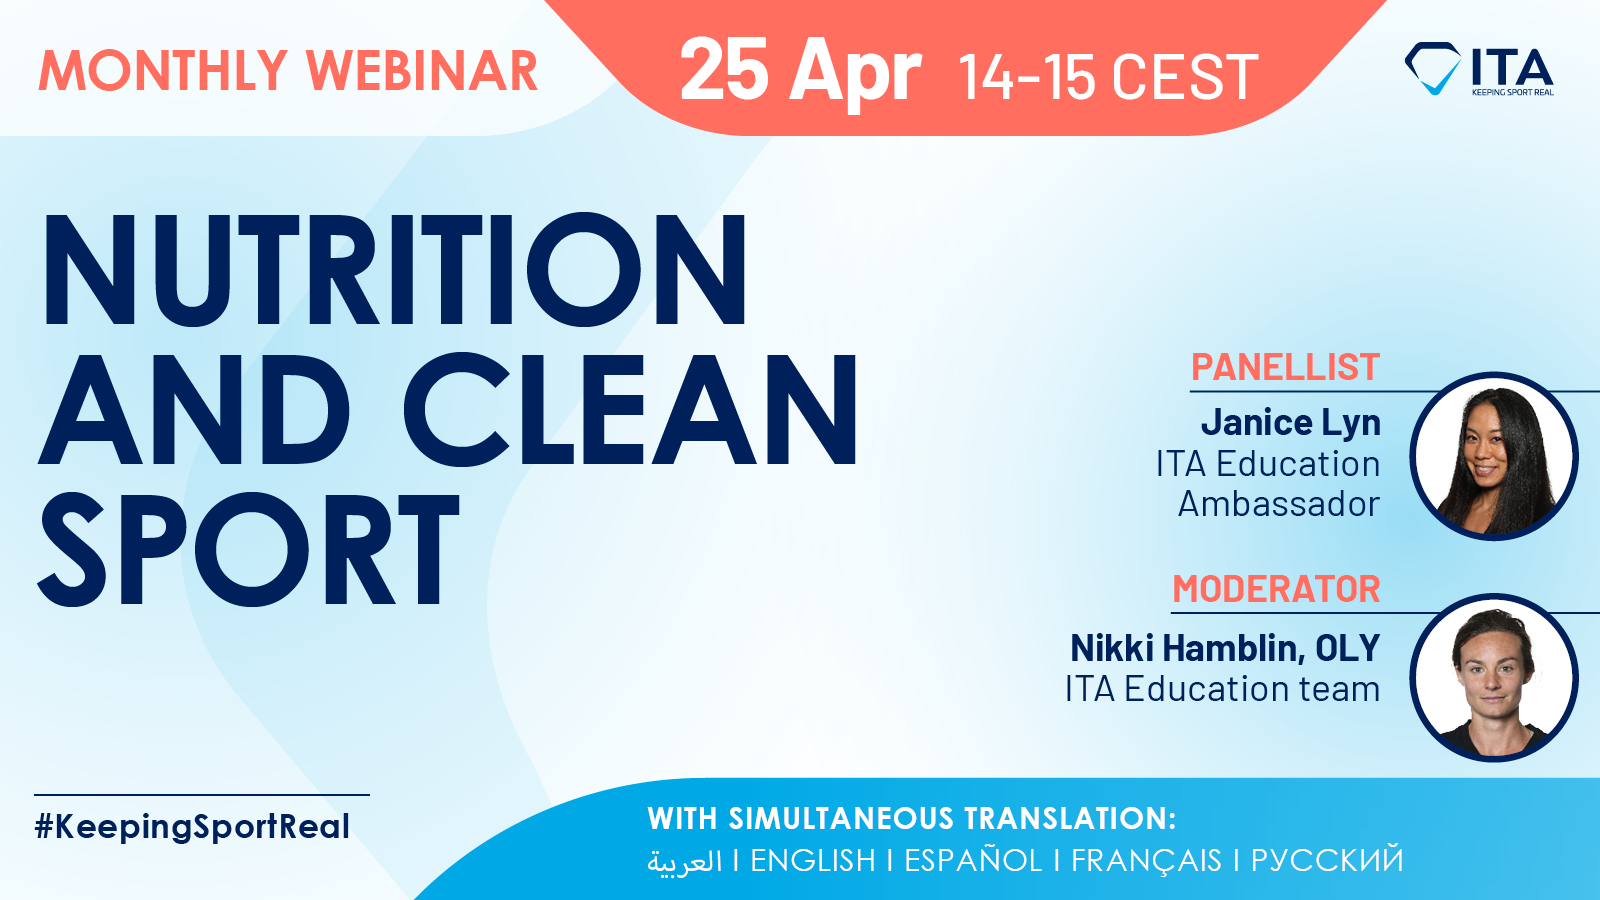 Monthly webinar - Nutrition and clean sport